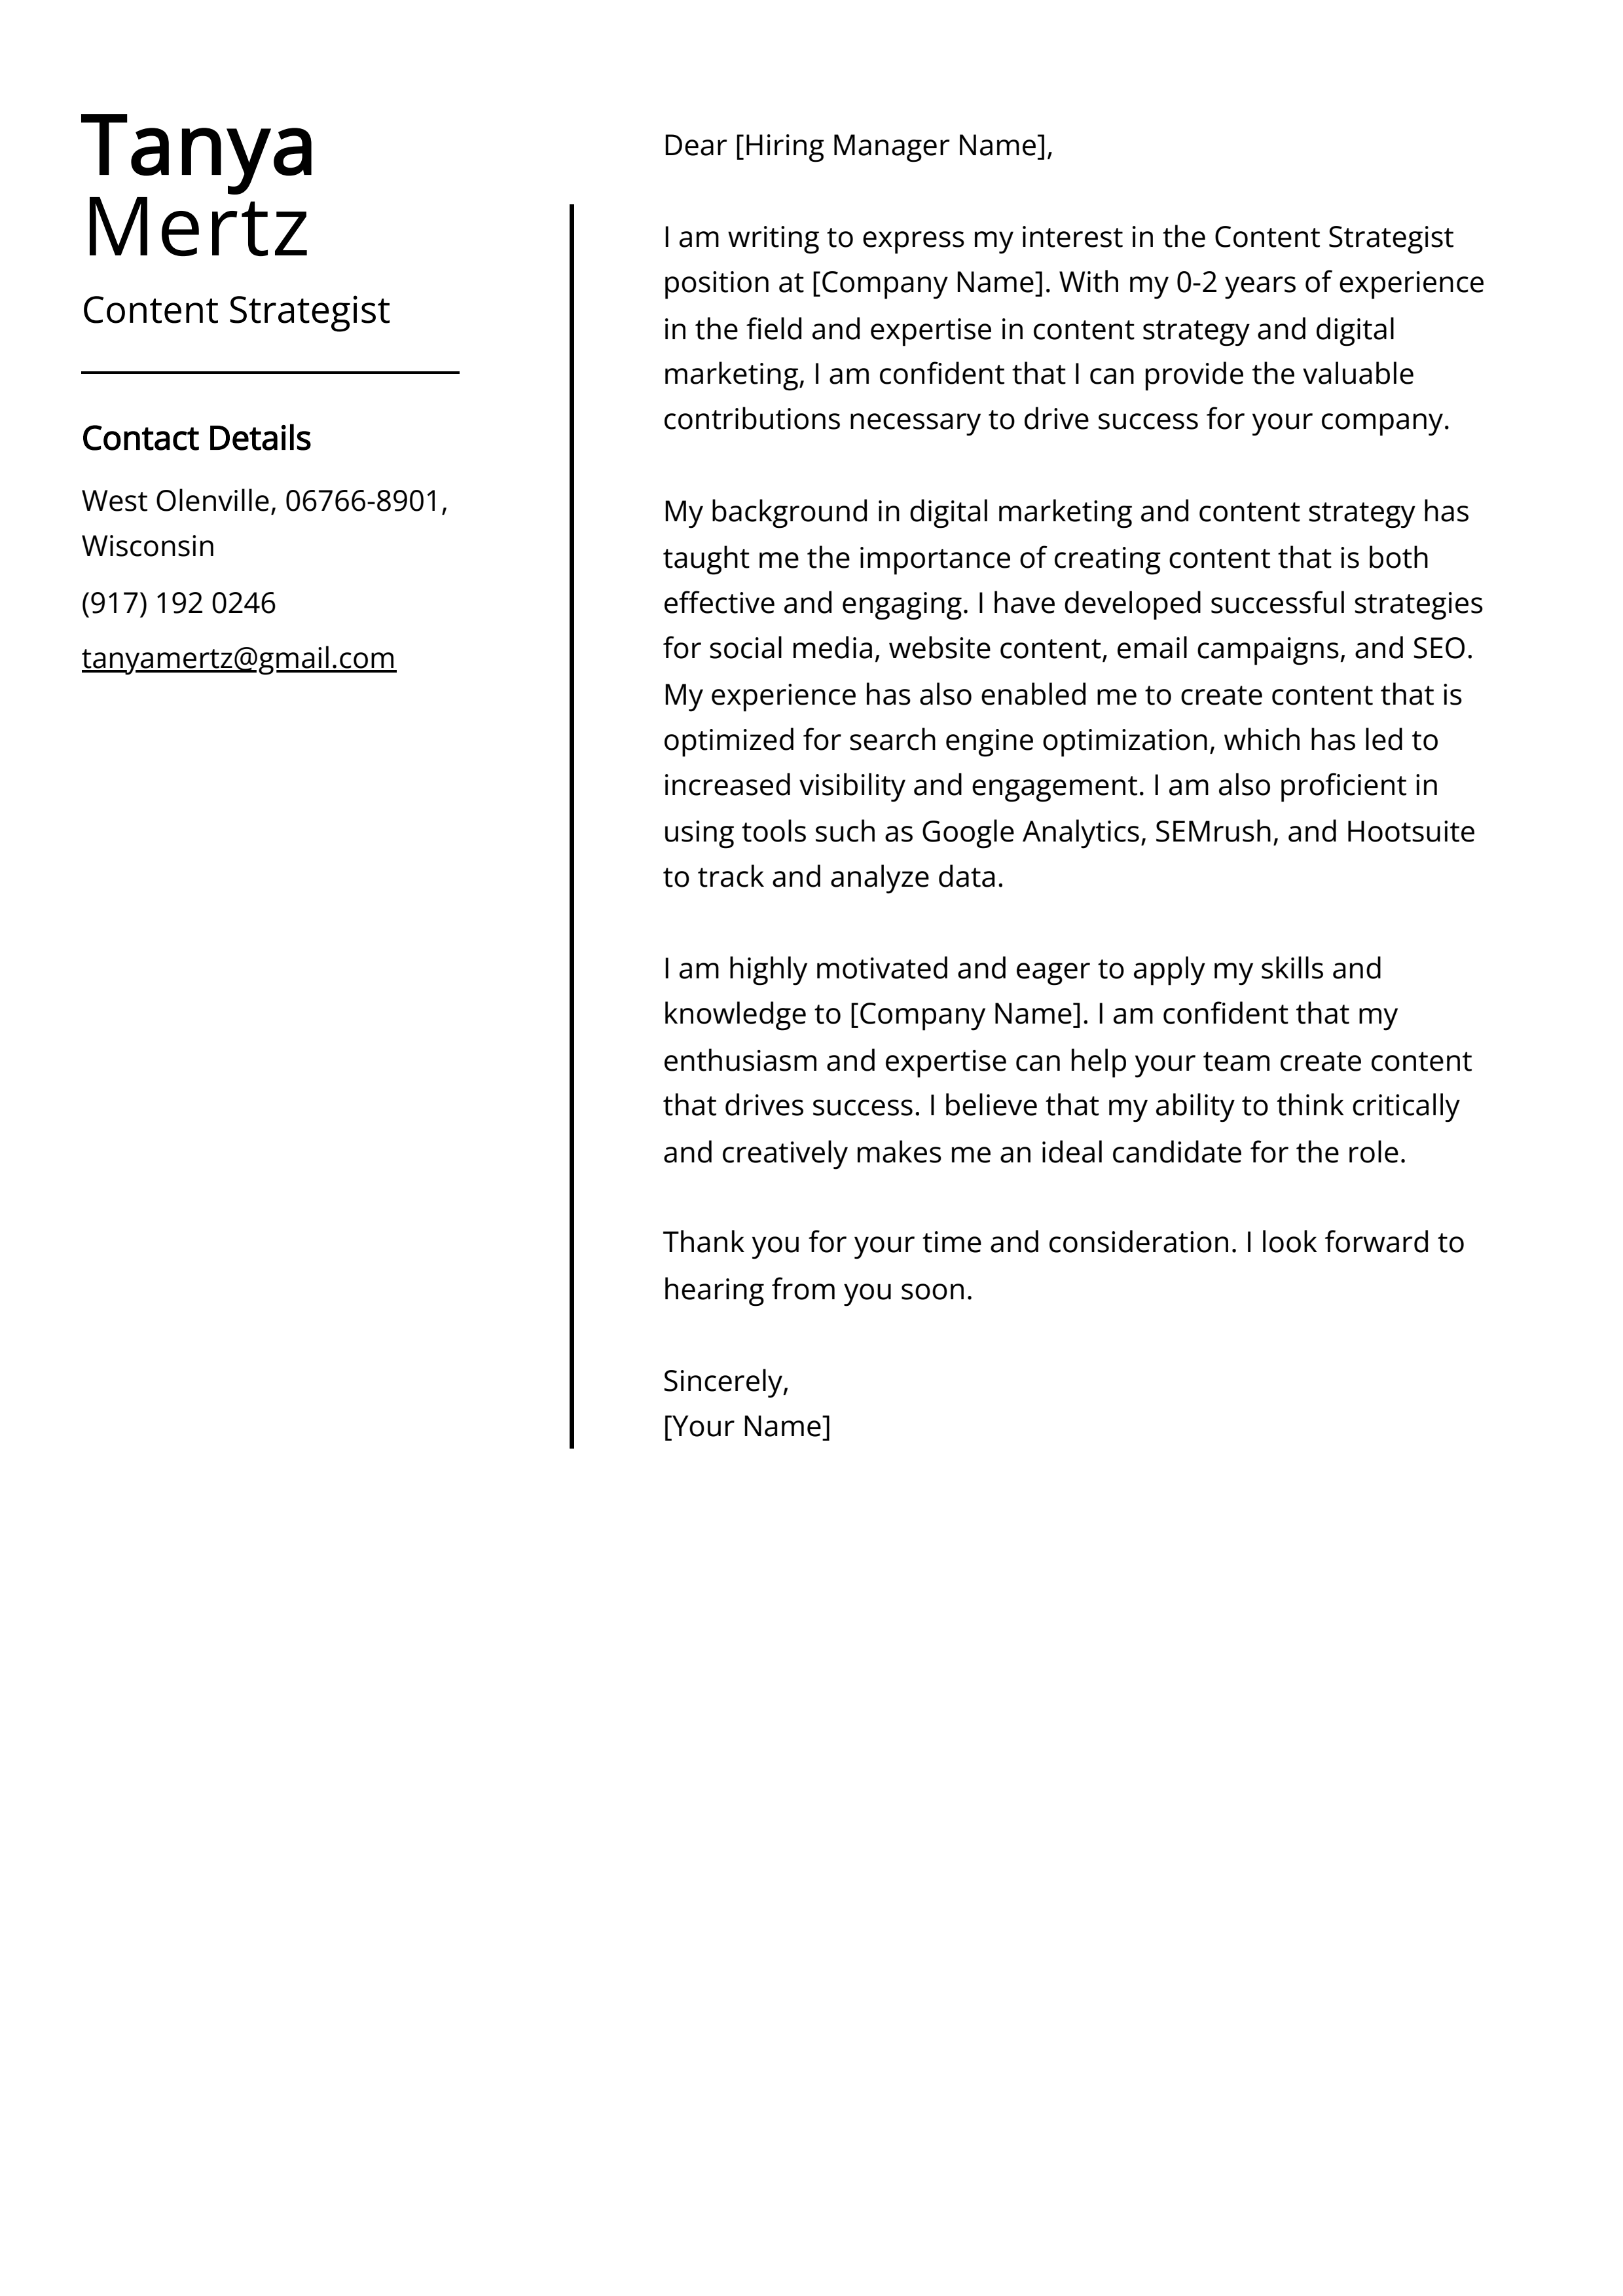 Content Strategist Cover Letter Example